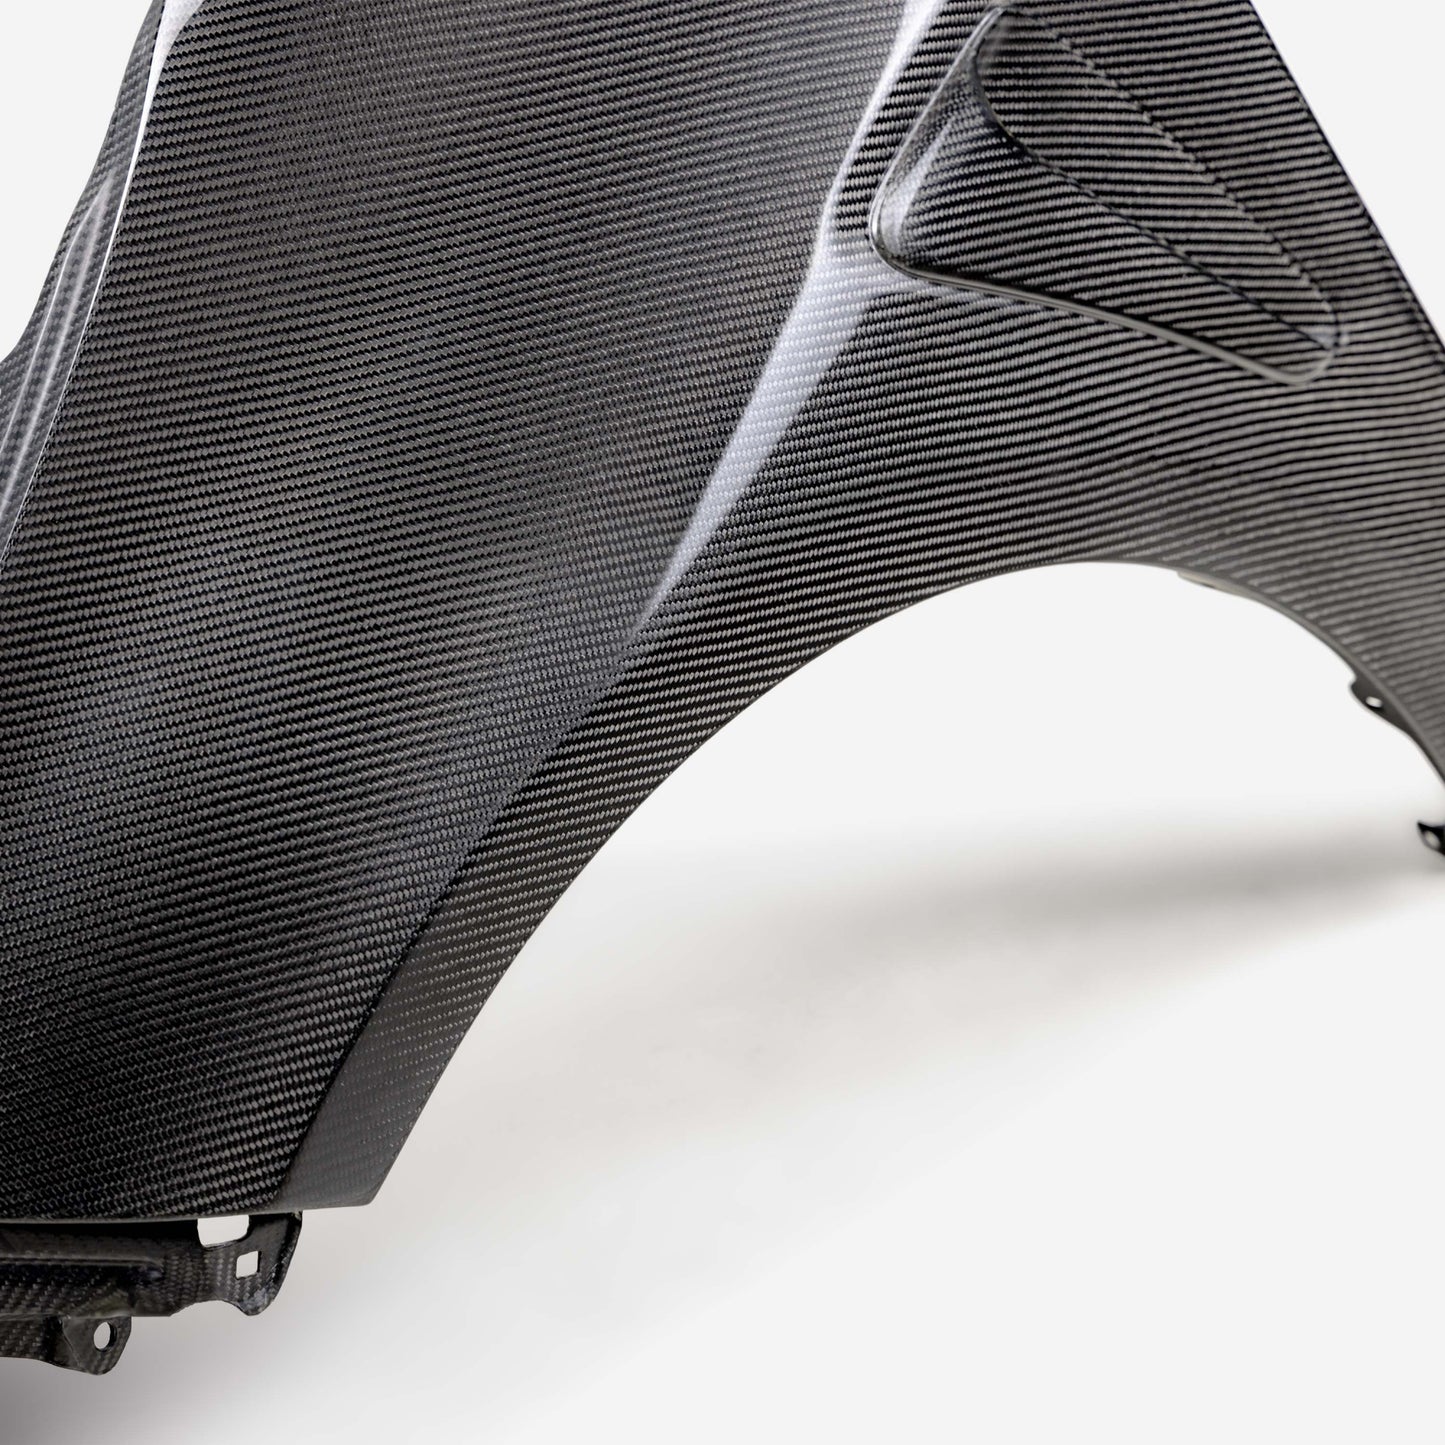 


Seibon Carbon components are carefully hand-crafted using only the finest materials. Our production team offers superior craftsmanship with over 20 years of experFendersSeibon Carbon